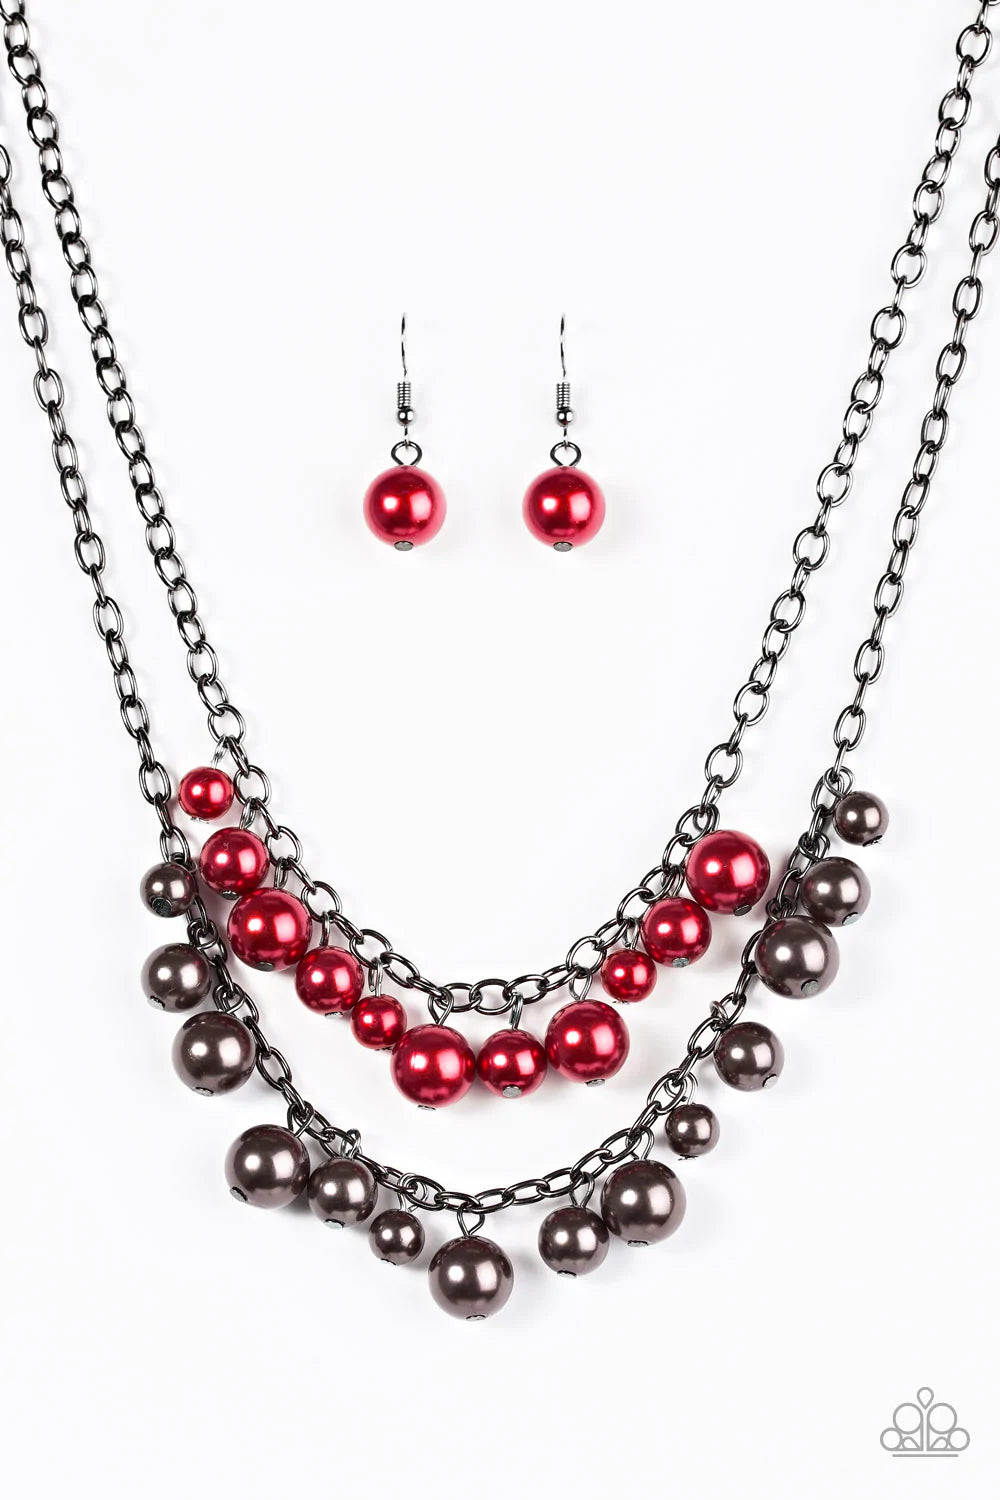 Paparazzi Necklace ~ Marvelous Masquerade - Red